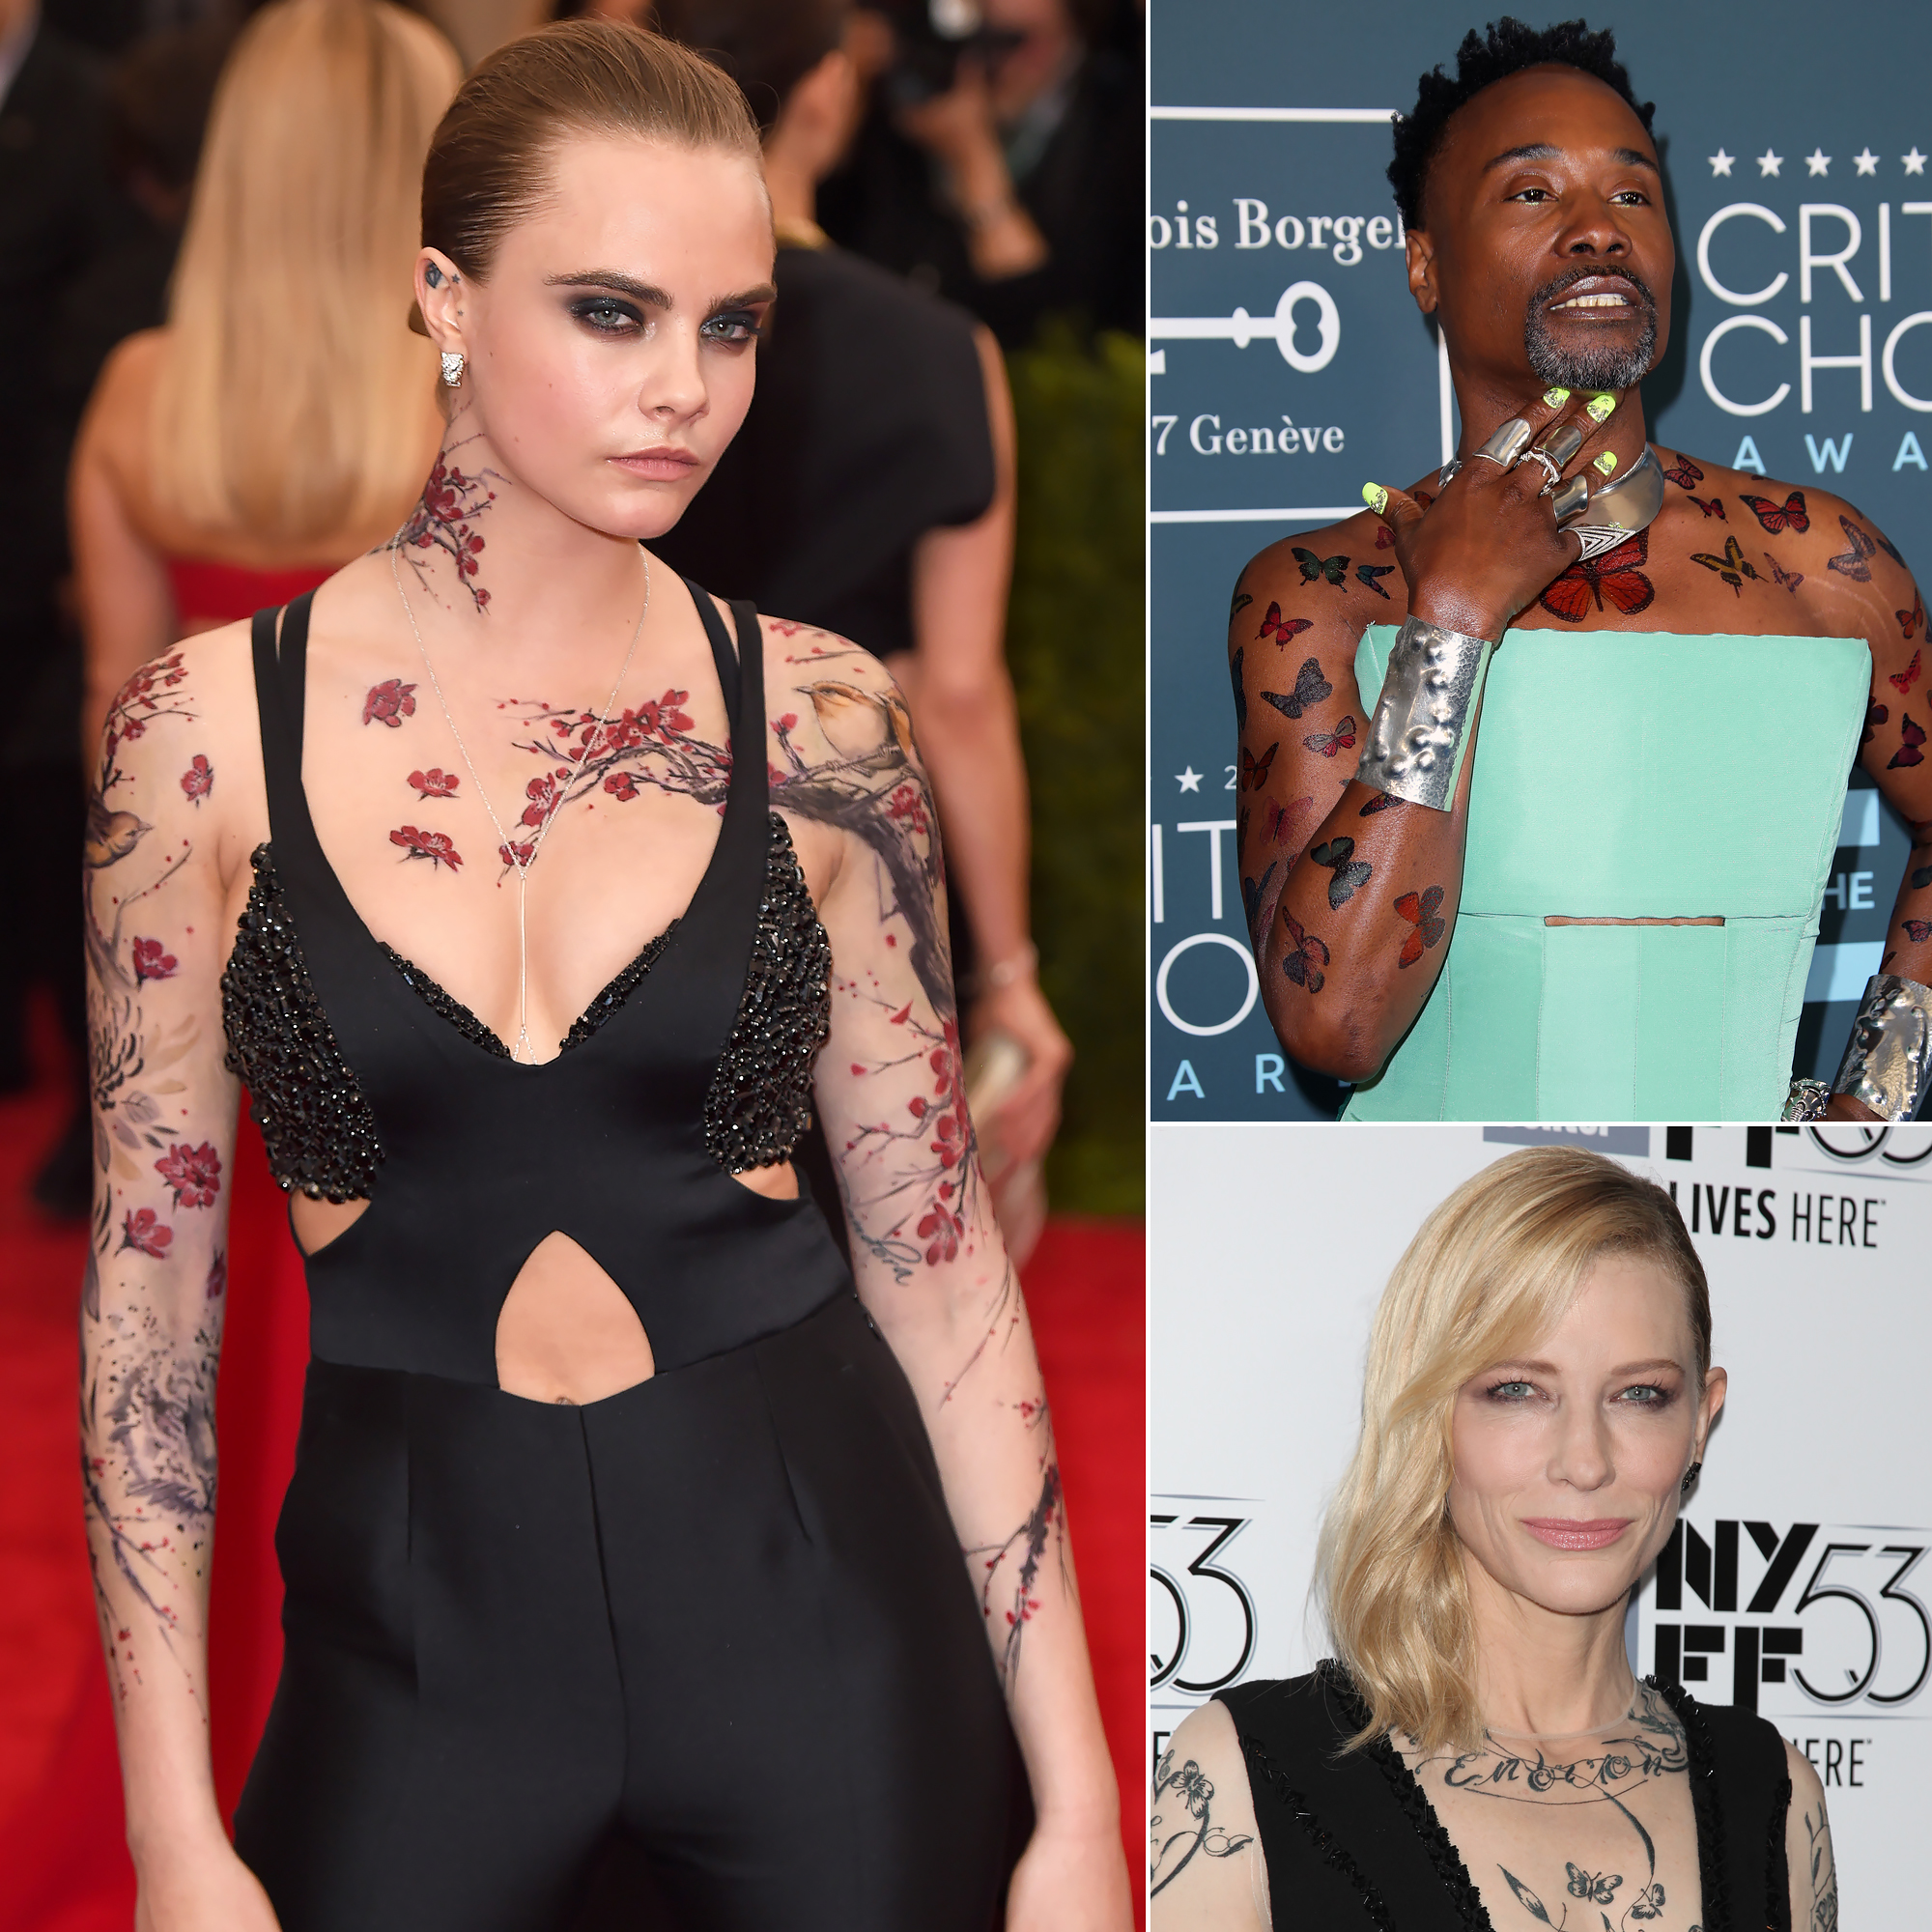 Celebrity Artistic Graphic Tattoos and Body Art: Pics | Us Weekly